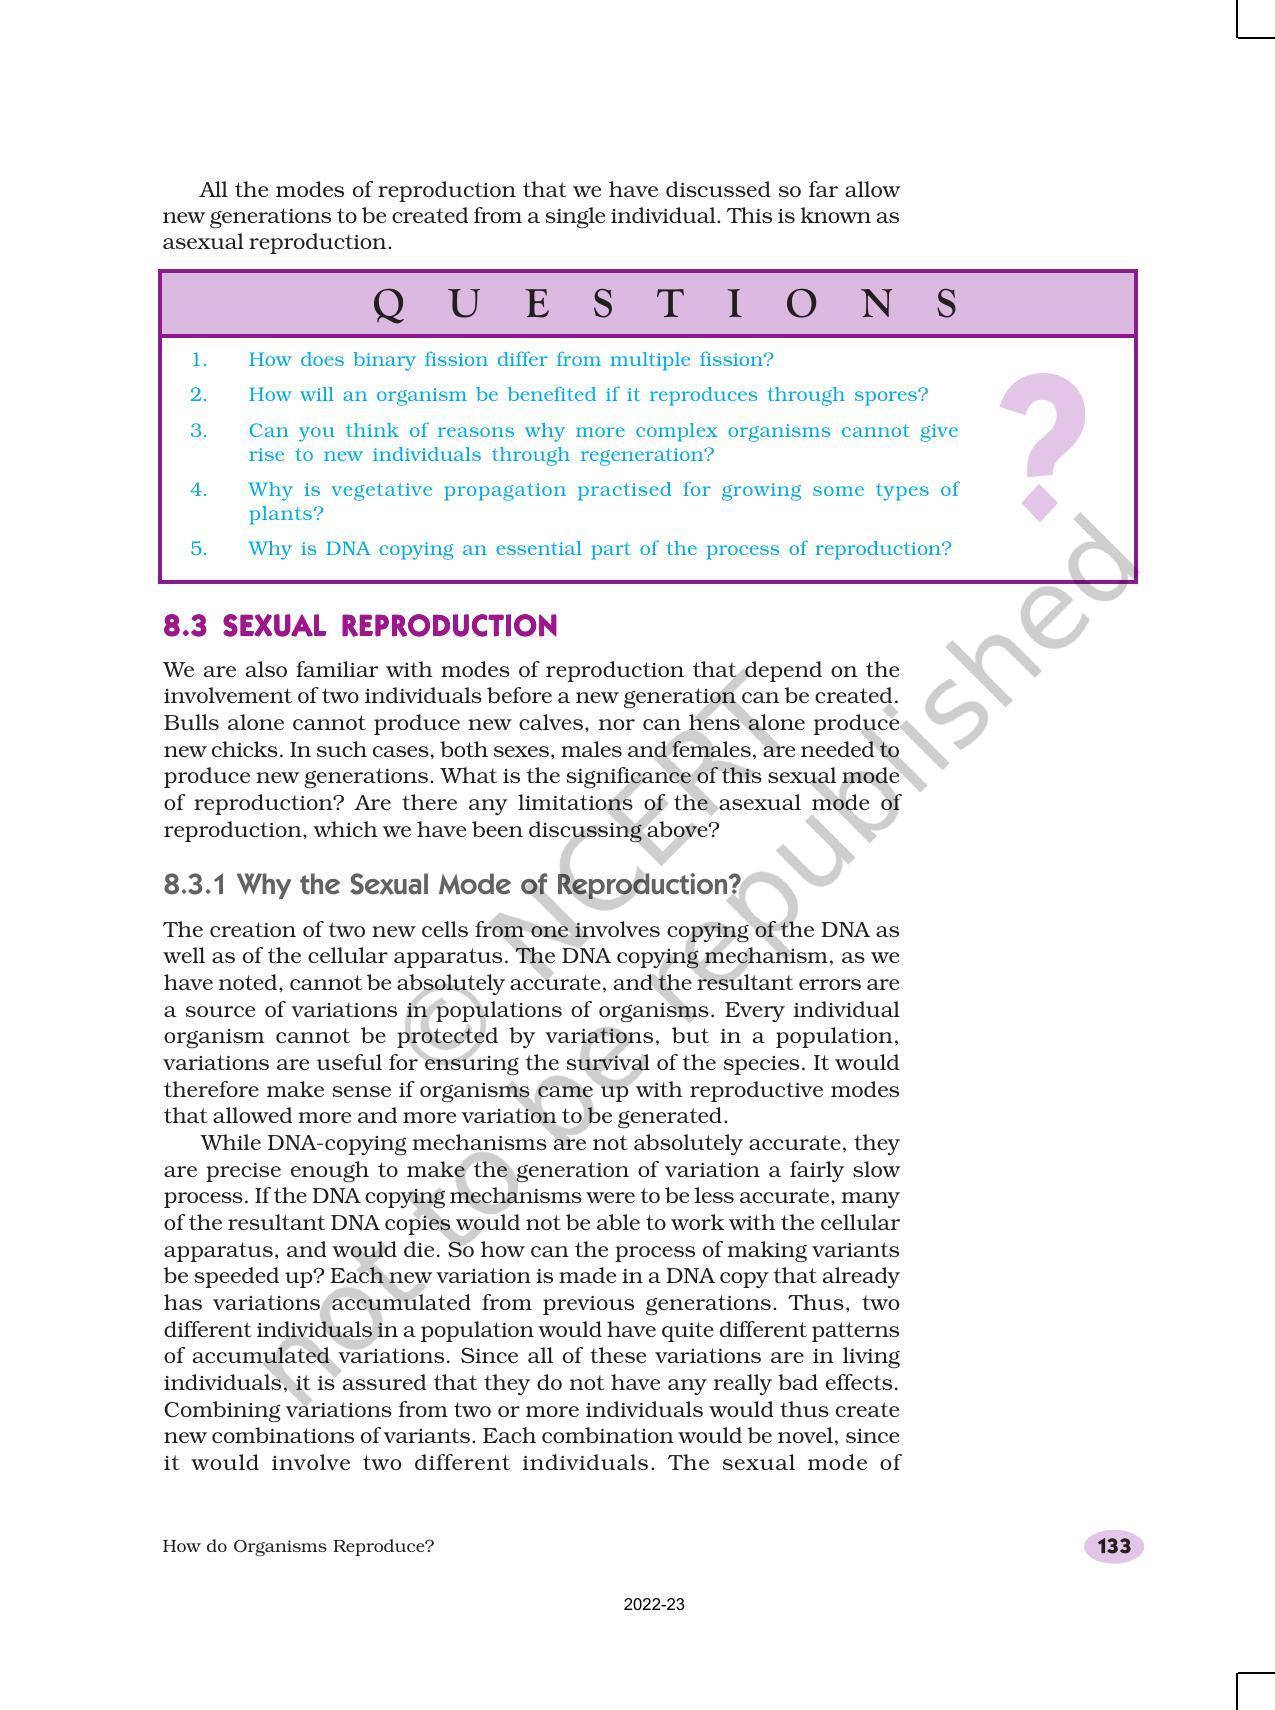 NCERT Book for Class 10 Science Chapter 8 How do Organisms Reproduce? - Page 7